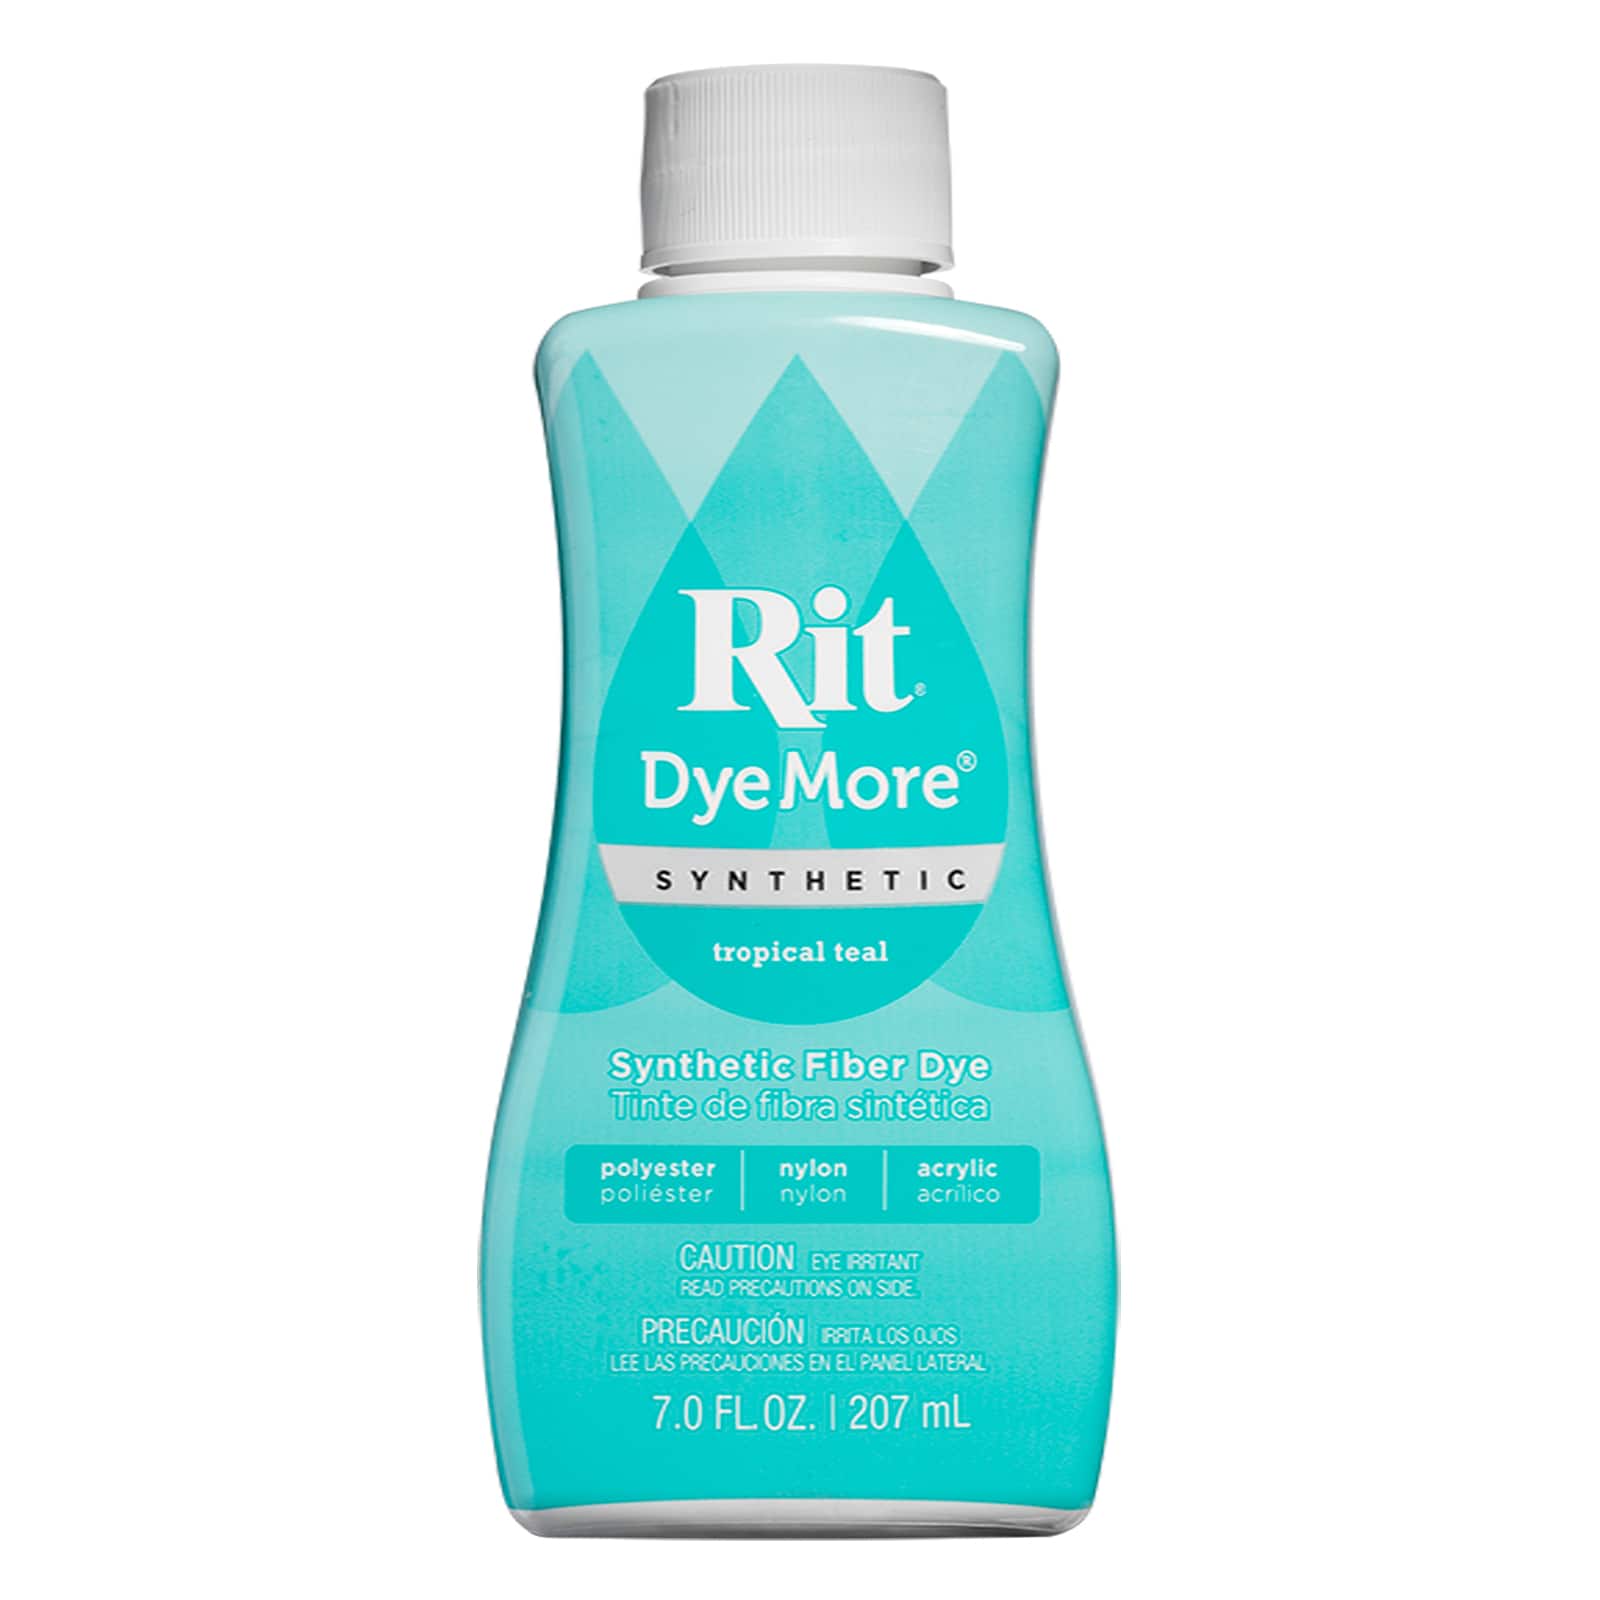 Rit DyeMore Synthetic Fiber Dye Product Guide: How to Use Rit